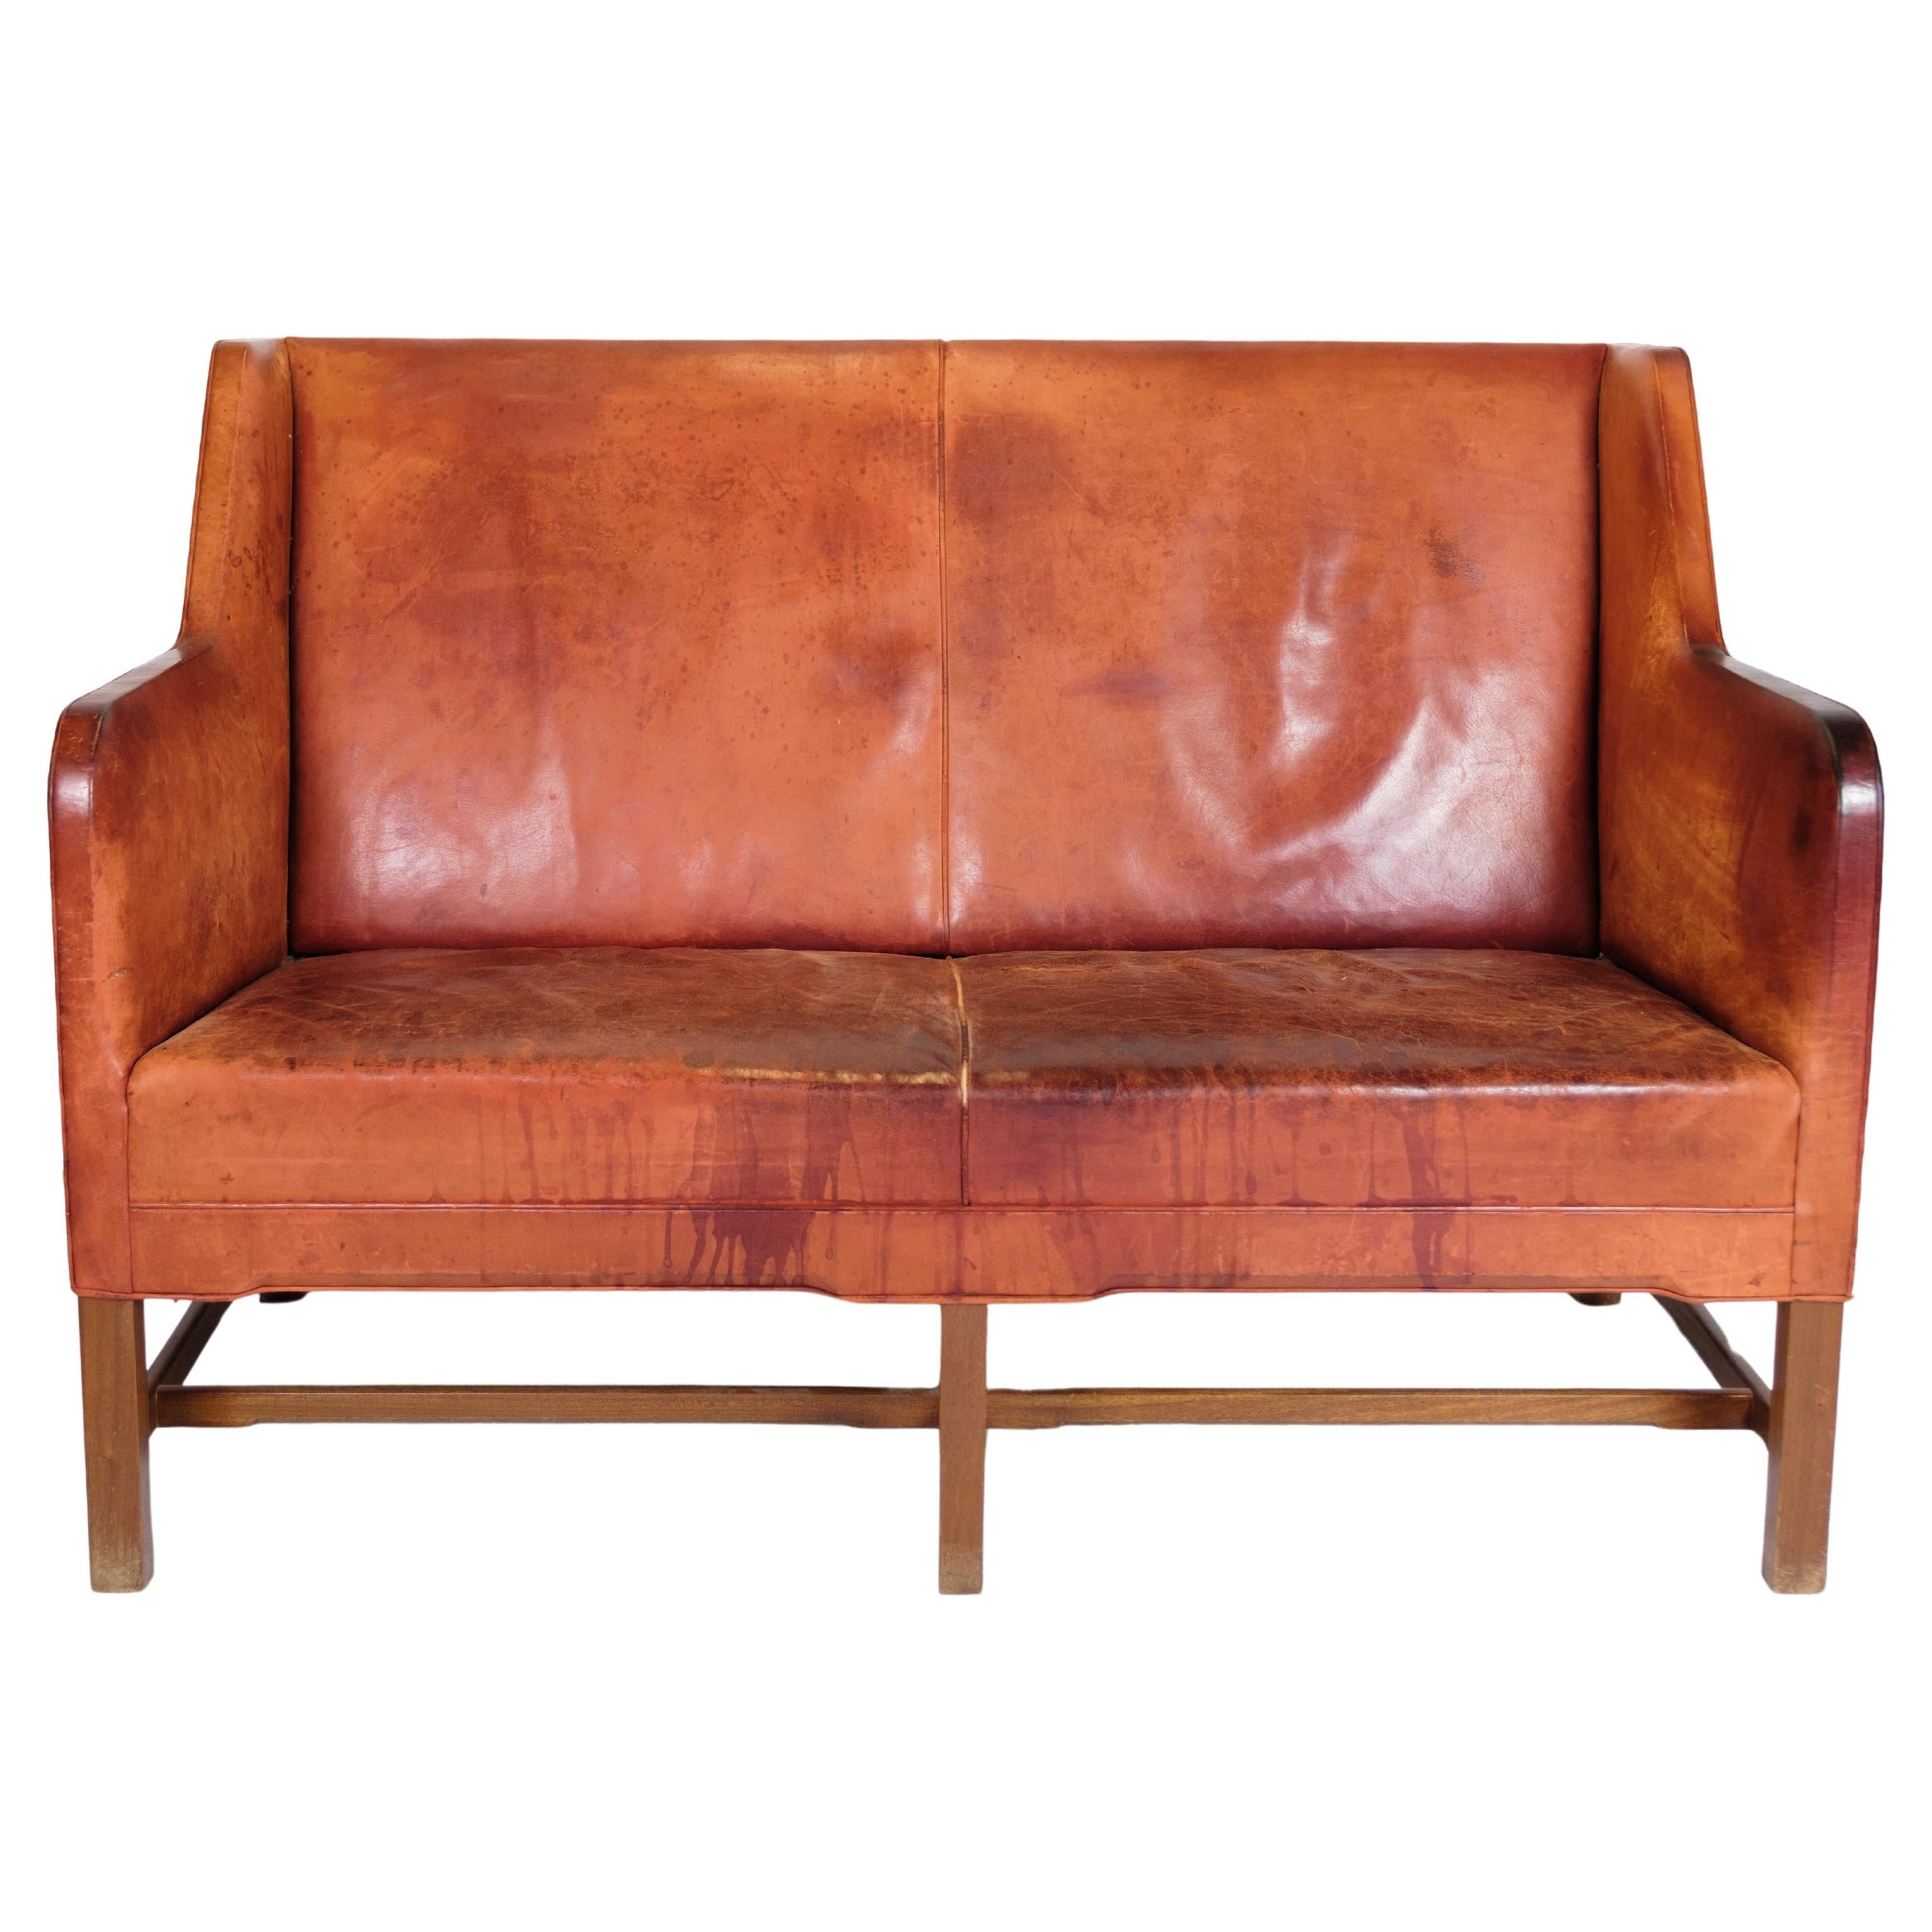 Vintage two-seater Sofa by Kaare Klint for Rud. Rasmussen 1935s For Sale